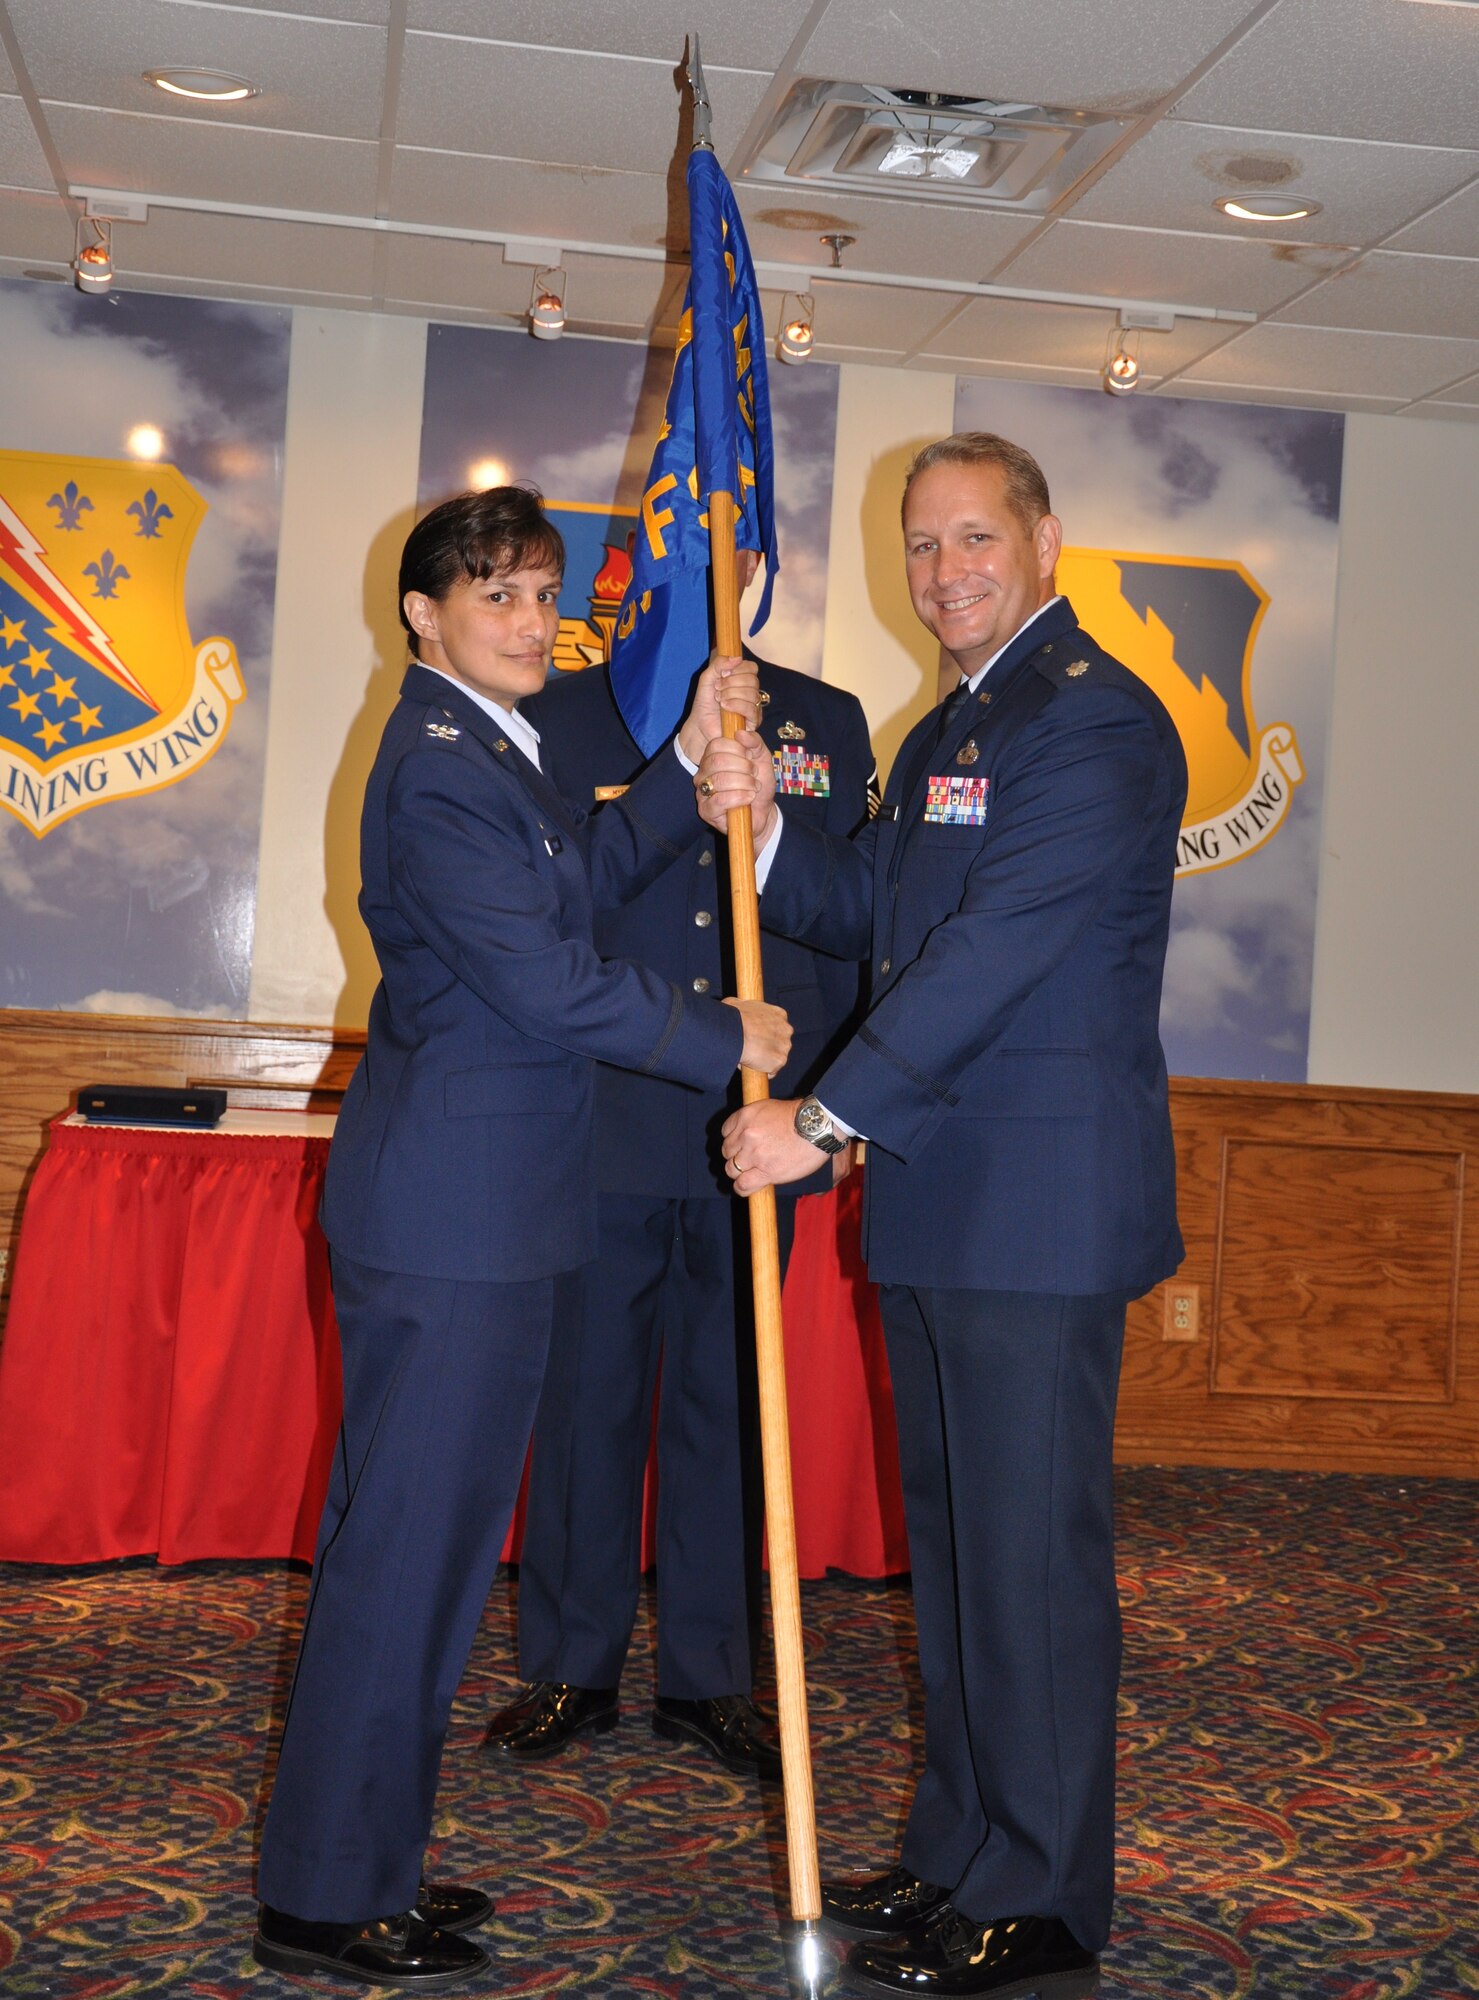 Lt. Col. Erik Bovasso (right), takes command of the 82nd Force Support Squadron from Col. Kimberley Ramos (left), 82nd Mission Support Group commander, during a change of command ceremony held in the Sheppard Club at Sheppard Air Force Base, Texas, July 12, 2010. The 82nd FSS provides personnel and manpower support to Team Sheppard and Combat Commanders across the globe. The incoming commander was previously the Force Development Division chief of the Headquarters Joint Special Operations Command, Fort Bragg, N.C. (U.S. Air Force photo/Airman 1st Class Valerie Hosea)